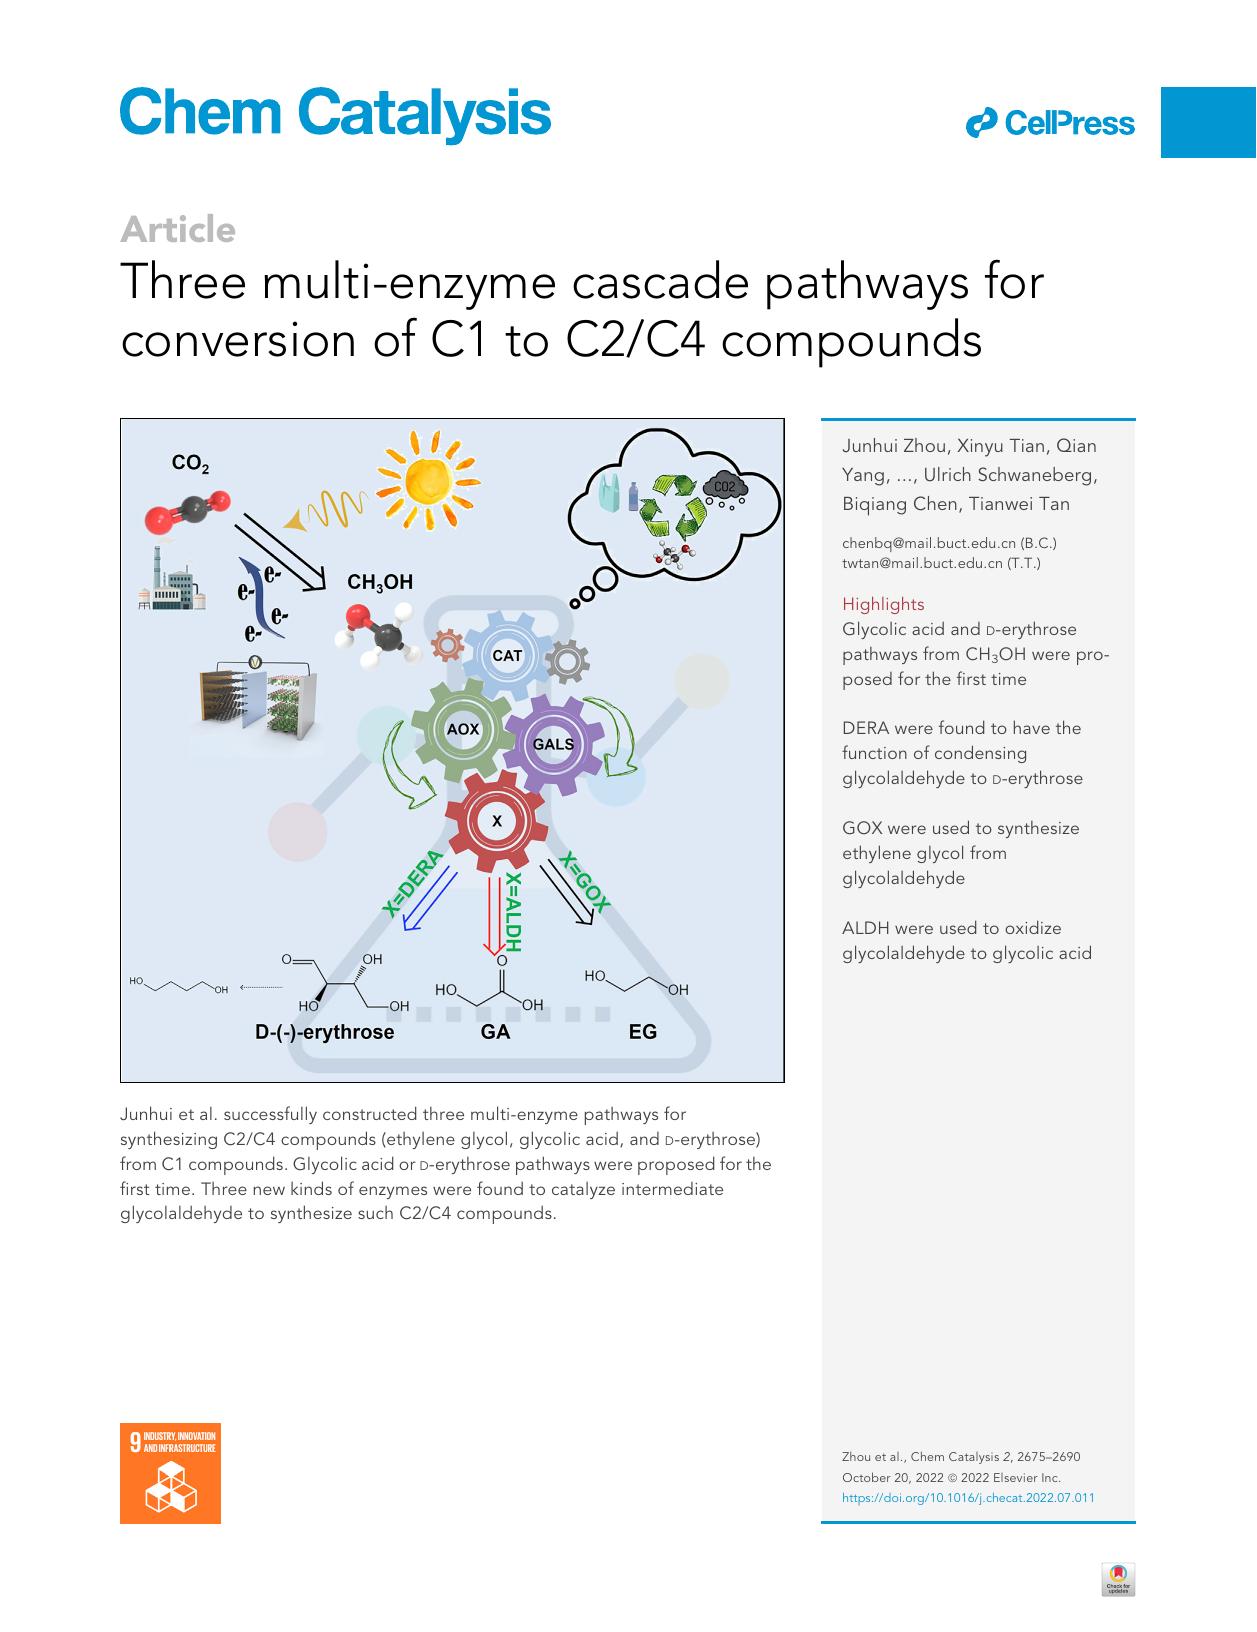 Three multi-enzyme cascade pathways for conversion of C1 to C2C4 compounds by unknow